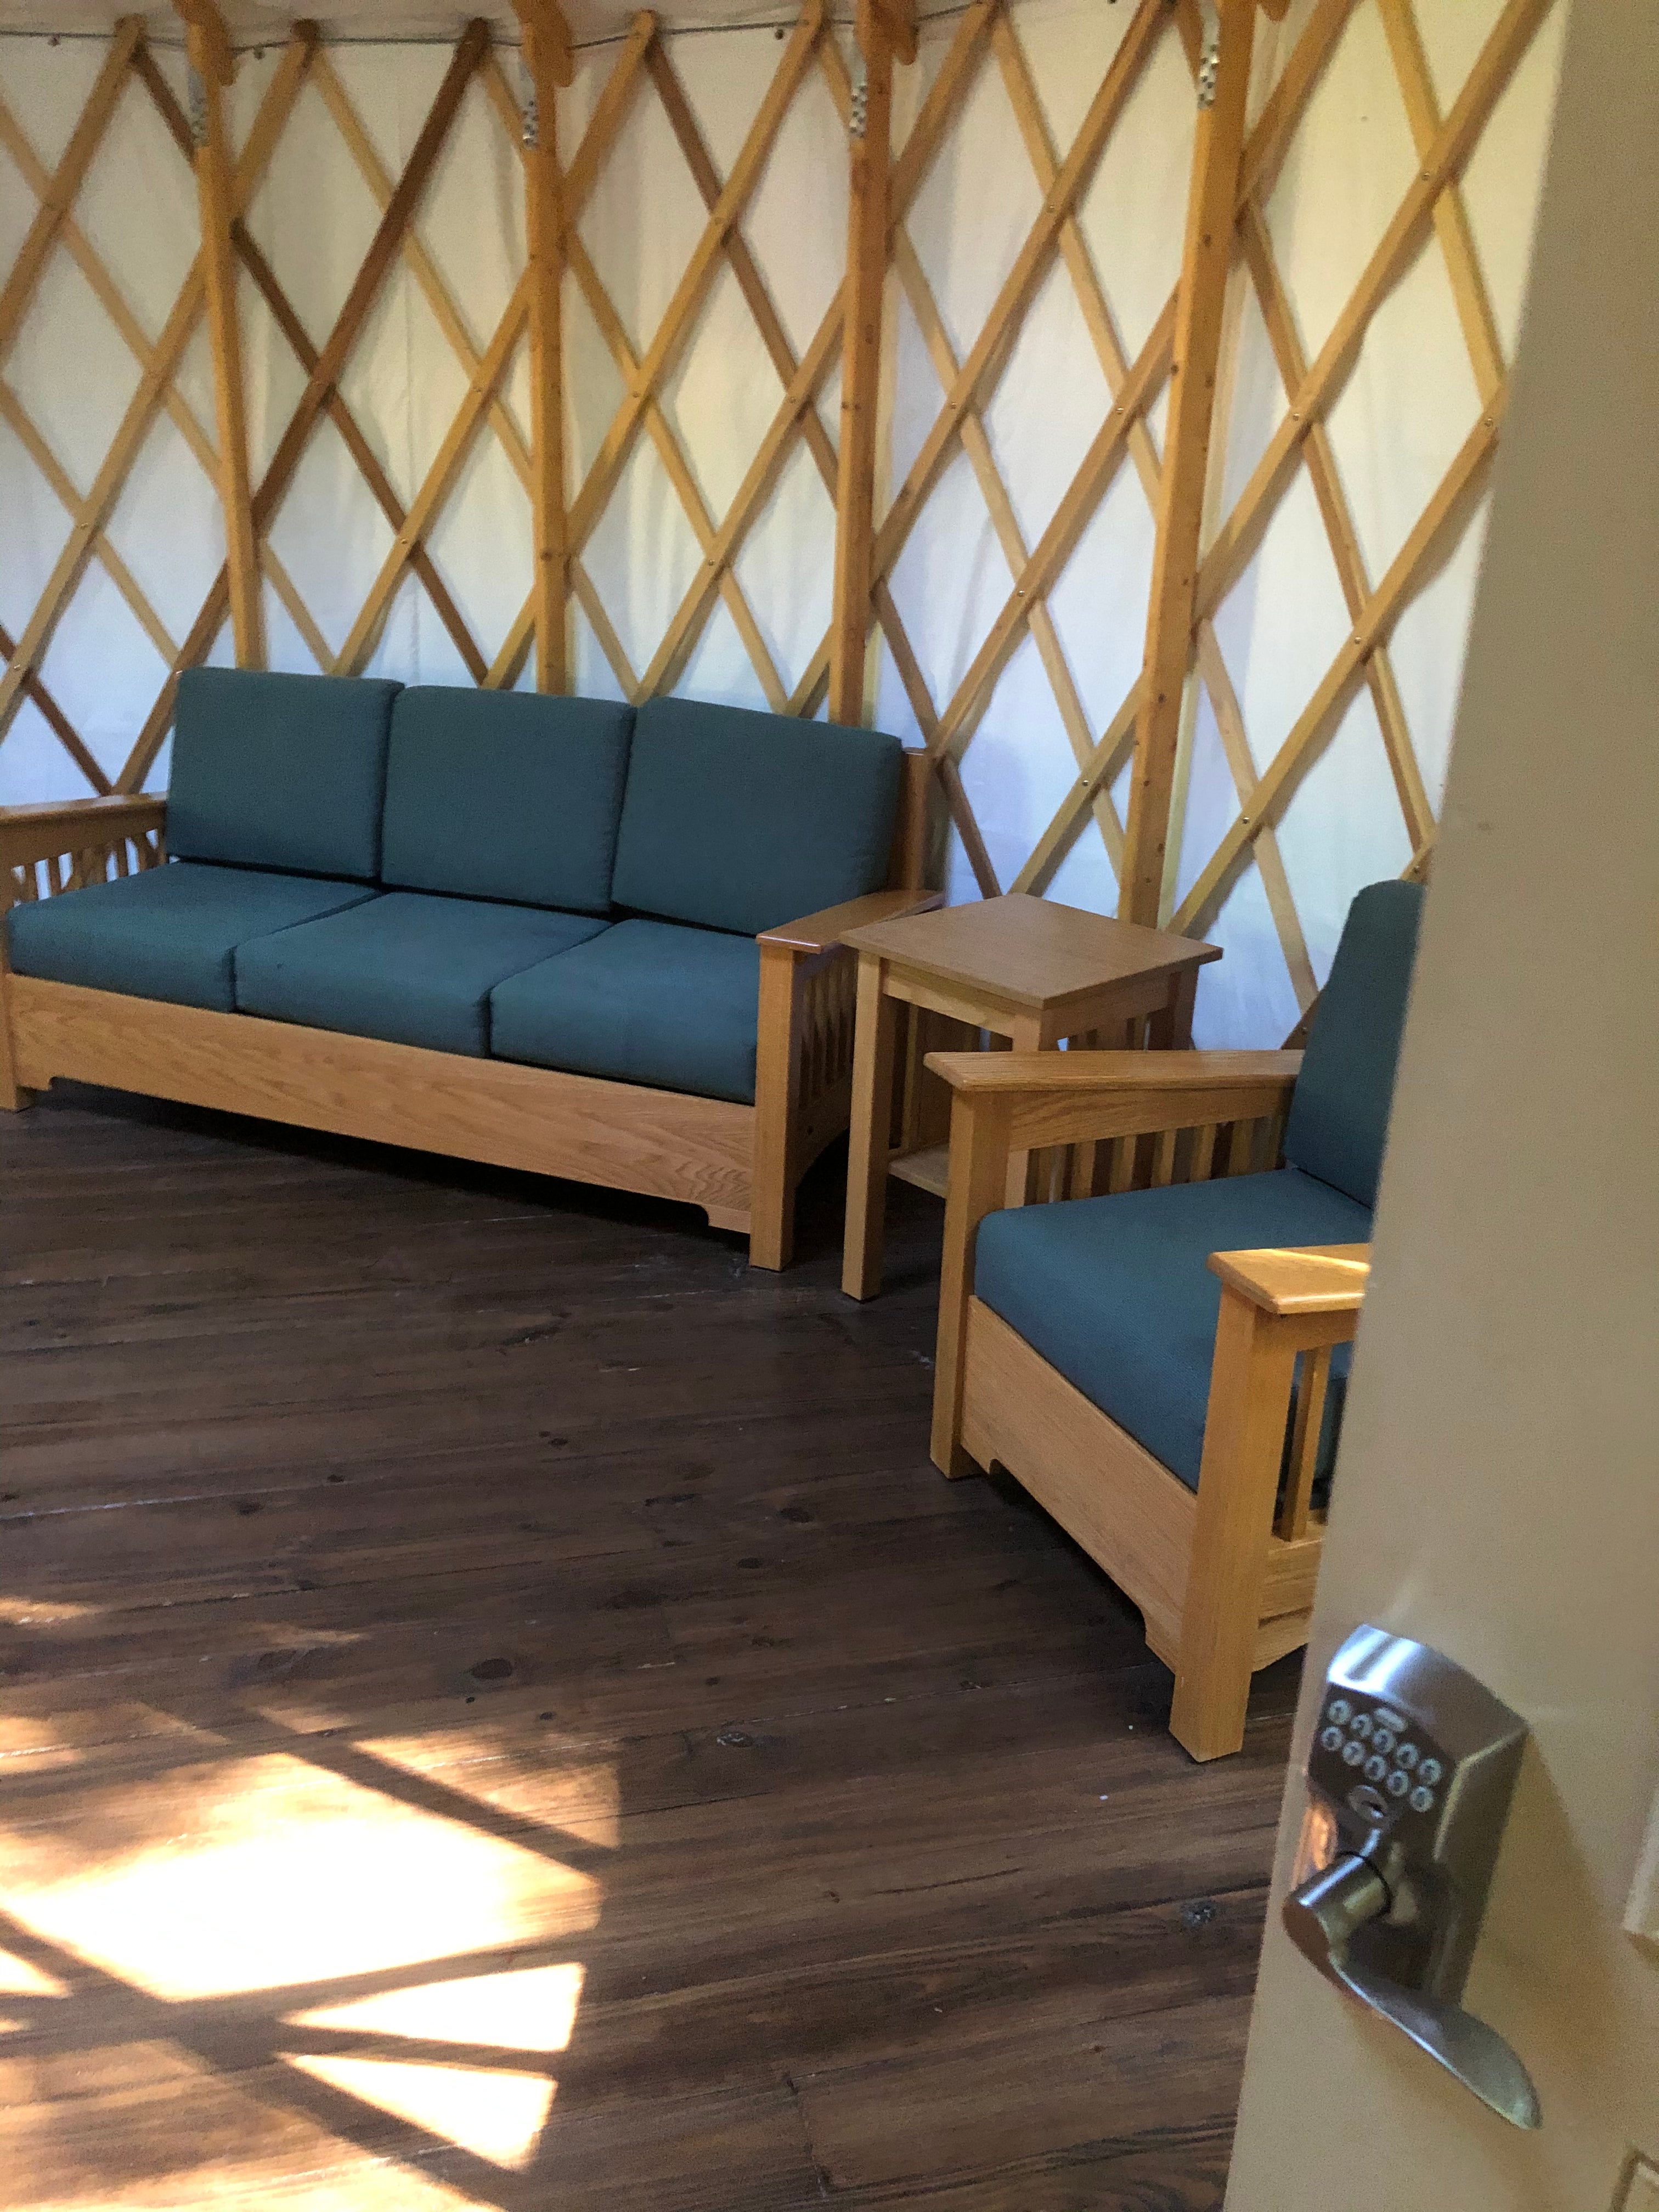 Couch and chair inside the yurt